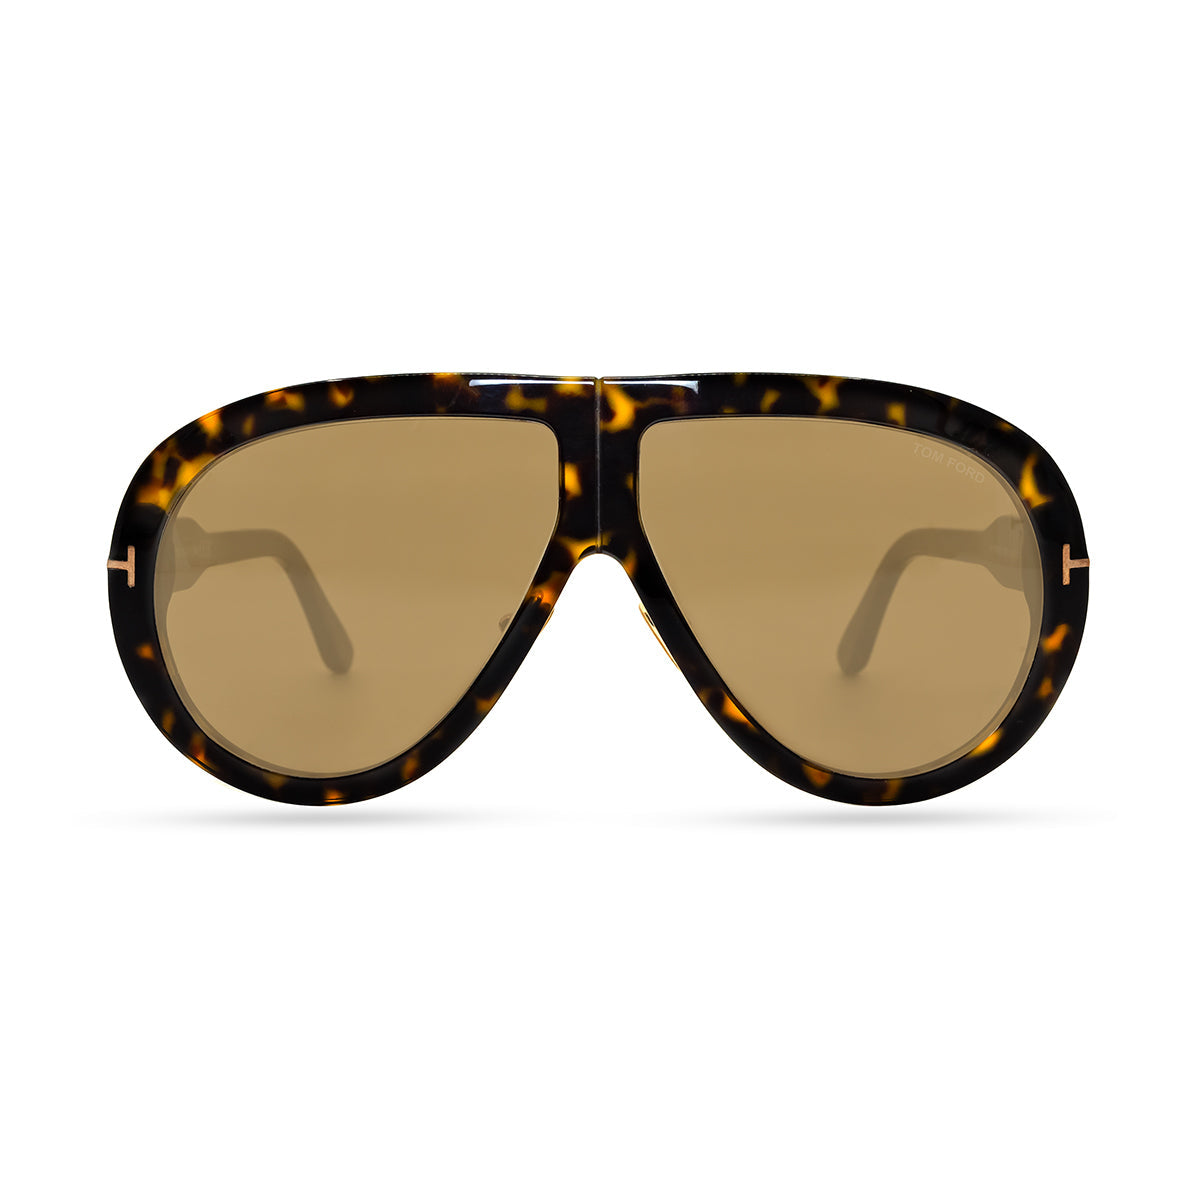 Load image into Gallery viewer, TOM FORD TF 836 TROY 52E sunglasses
